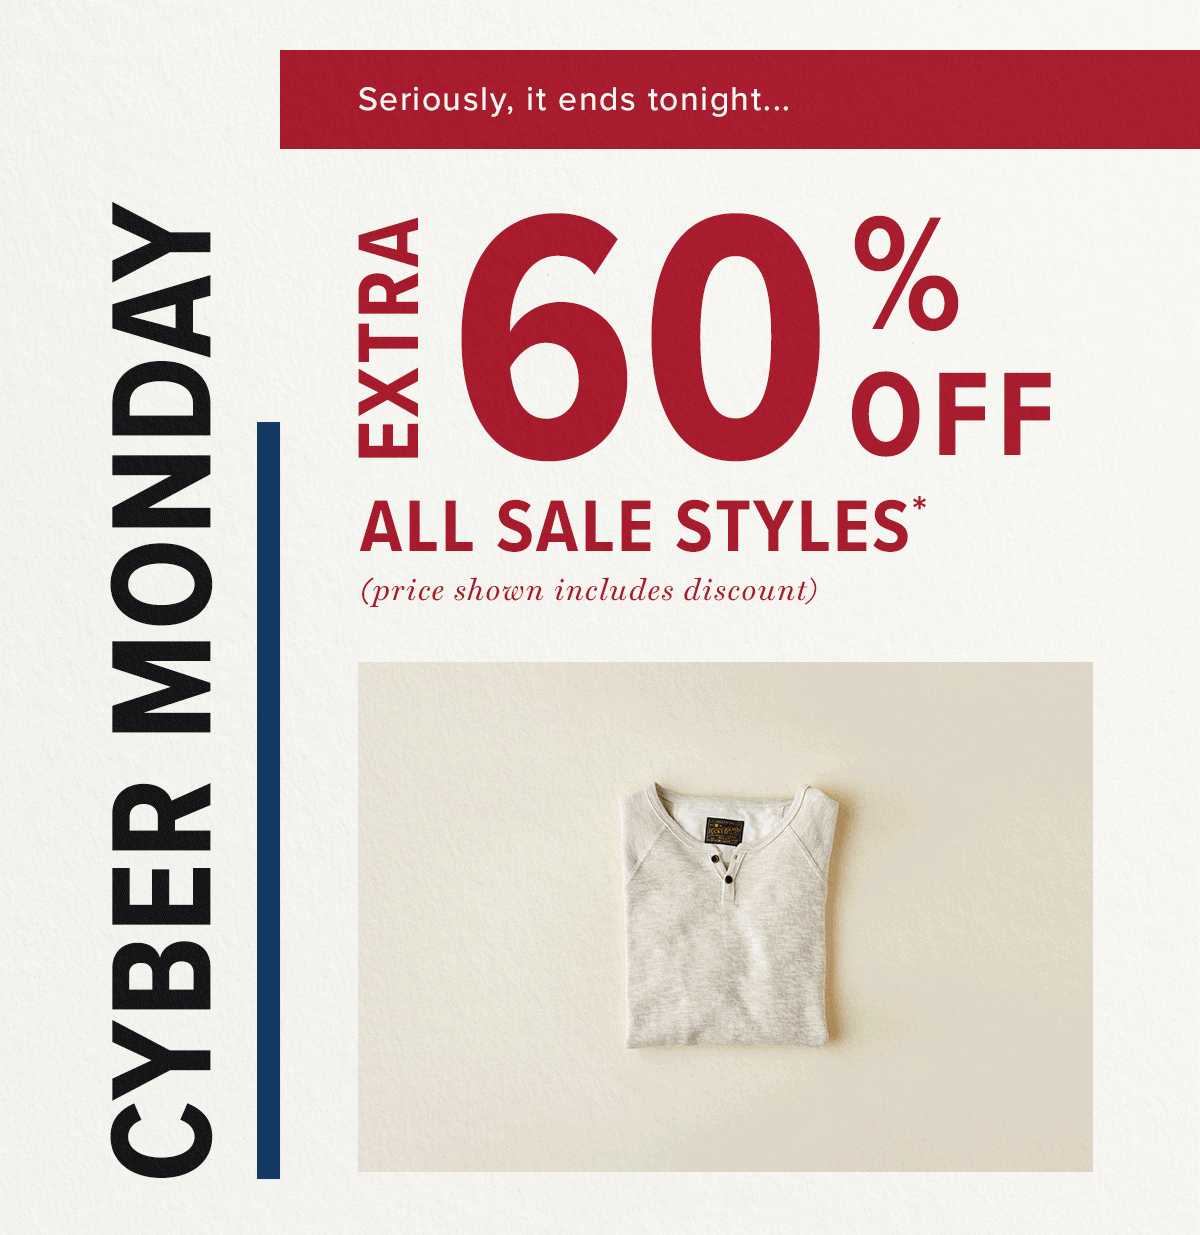 Extra 60% Off All Sale Styles!*